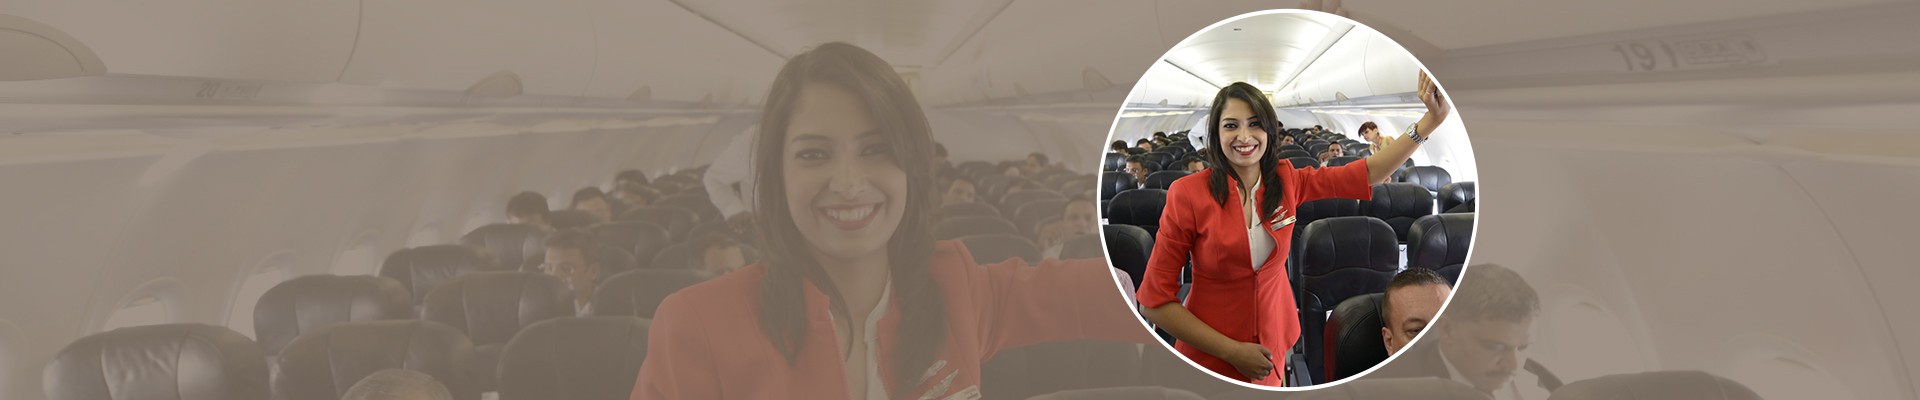 Distance Aviation Course for Air Hostess